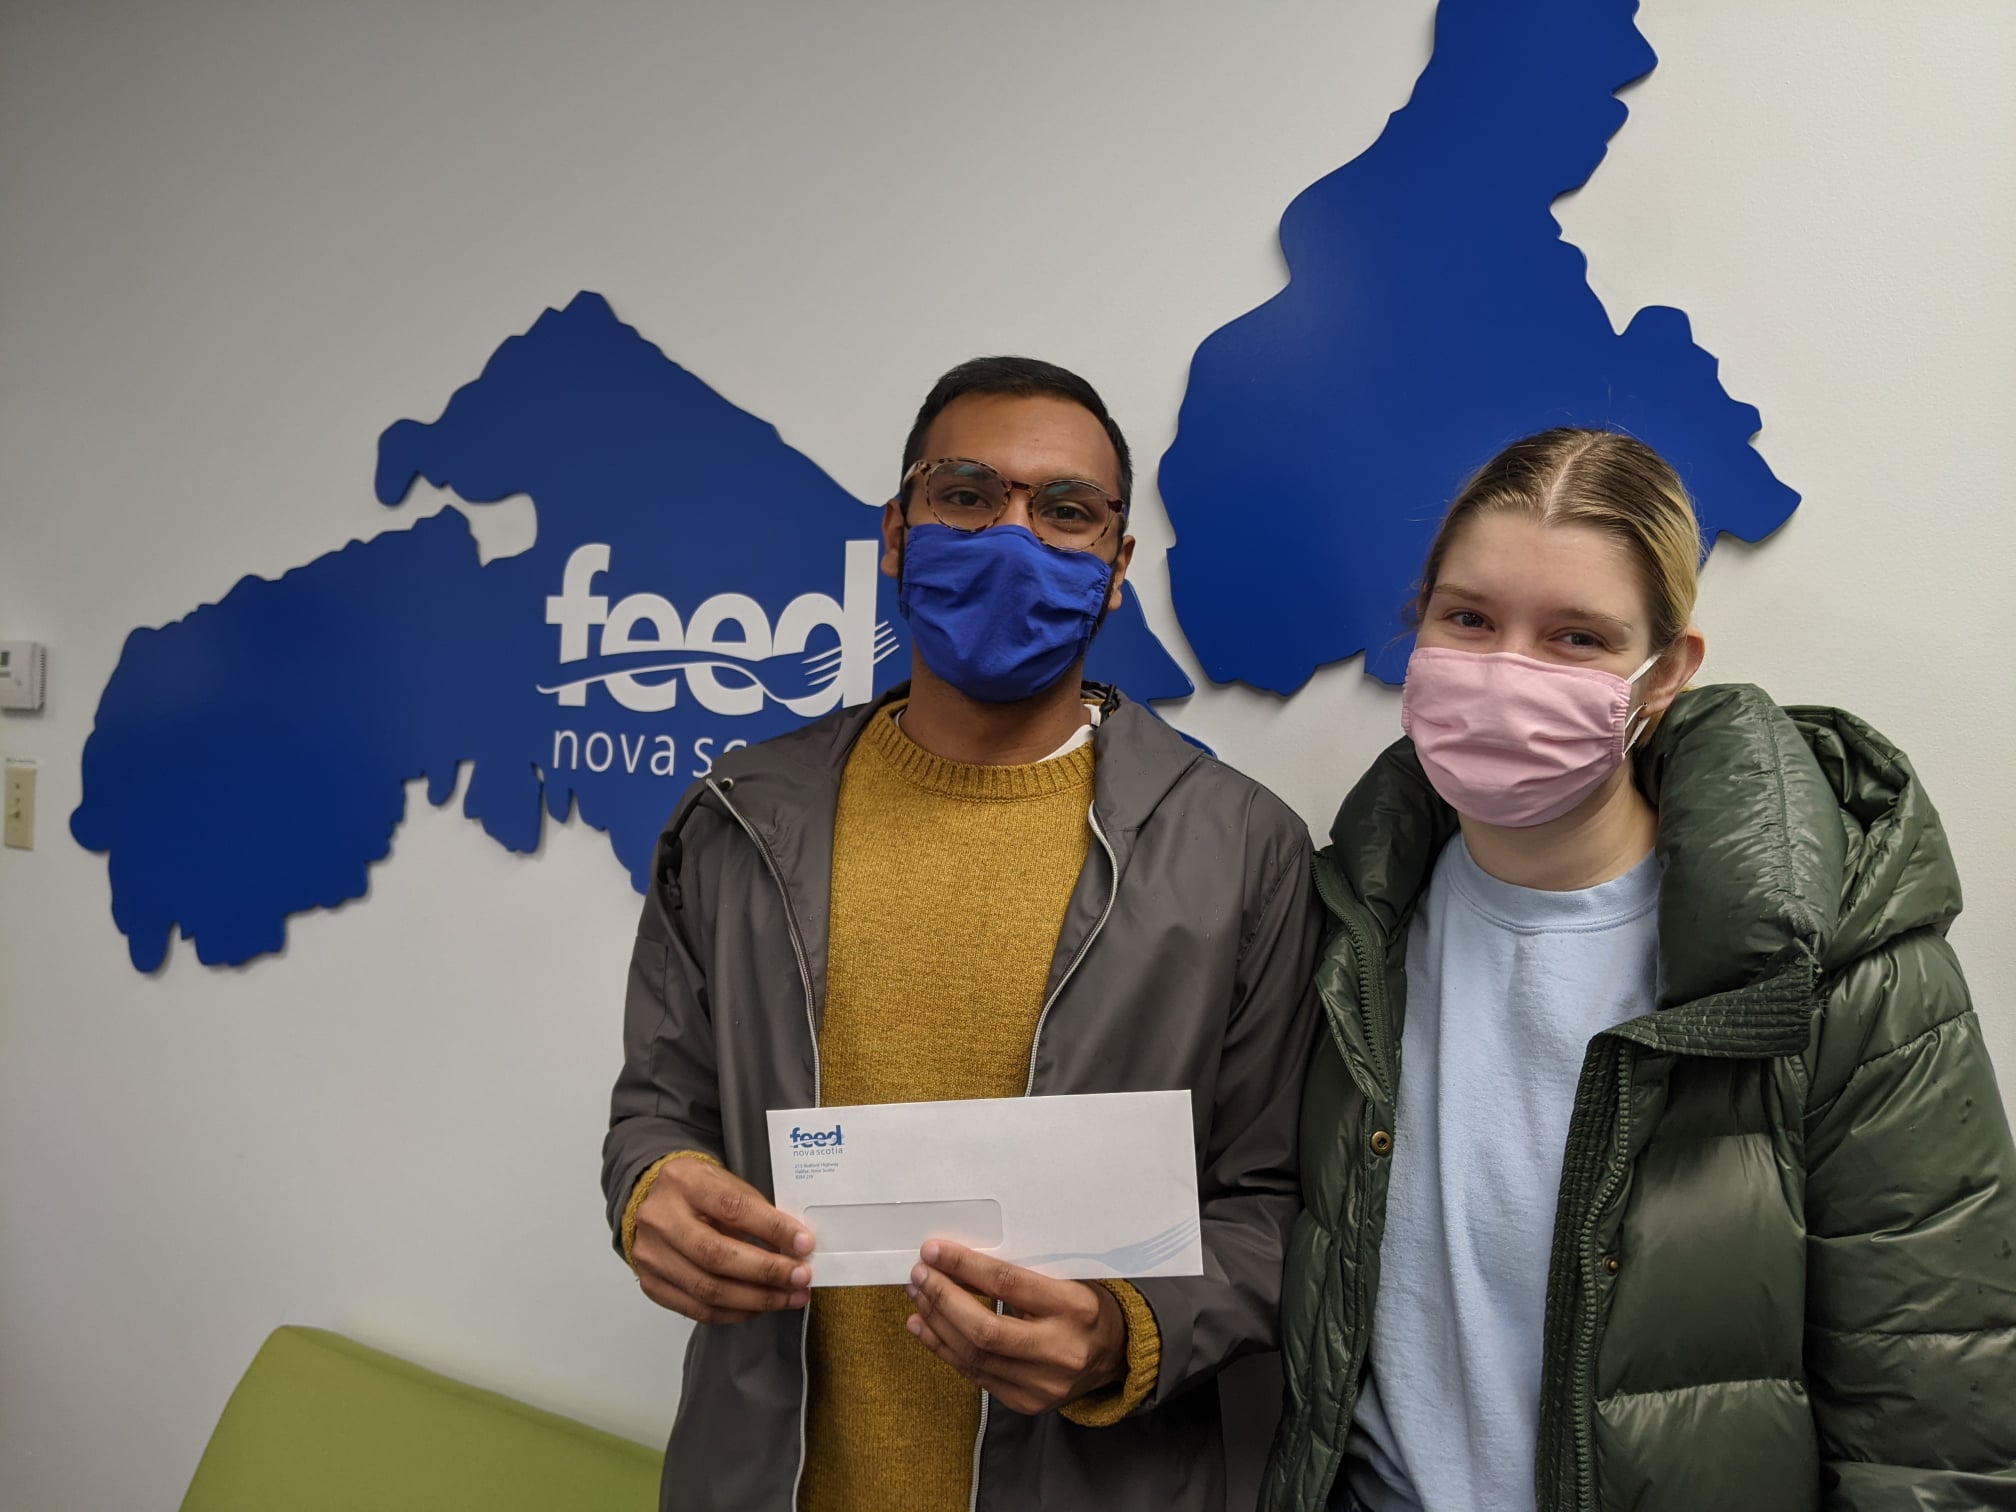 Shahbaz and his girlfriend holding cheque by Feed Nova Scotia sign